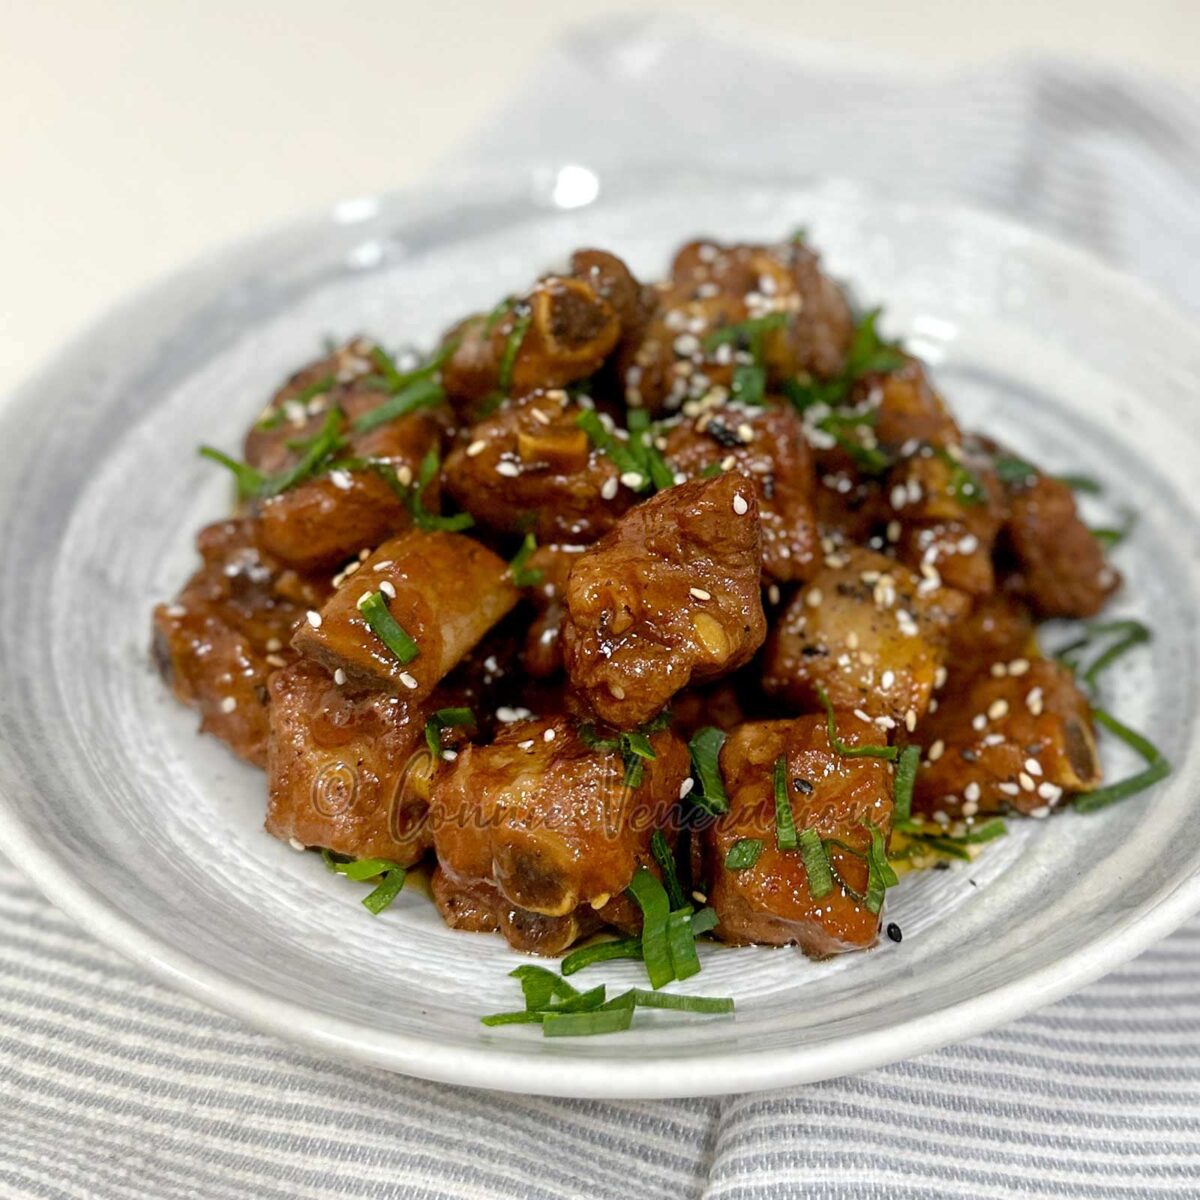 Stovetop soda braised pork ribs garnished with scallions and sesame seeds